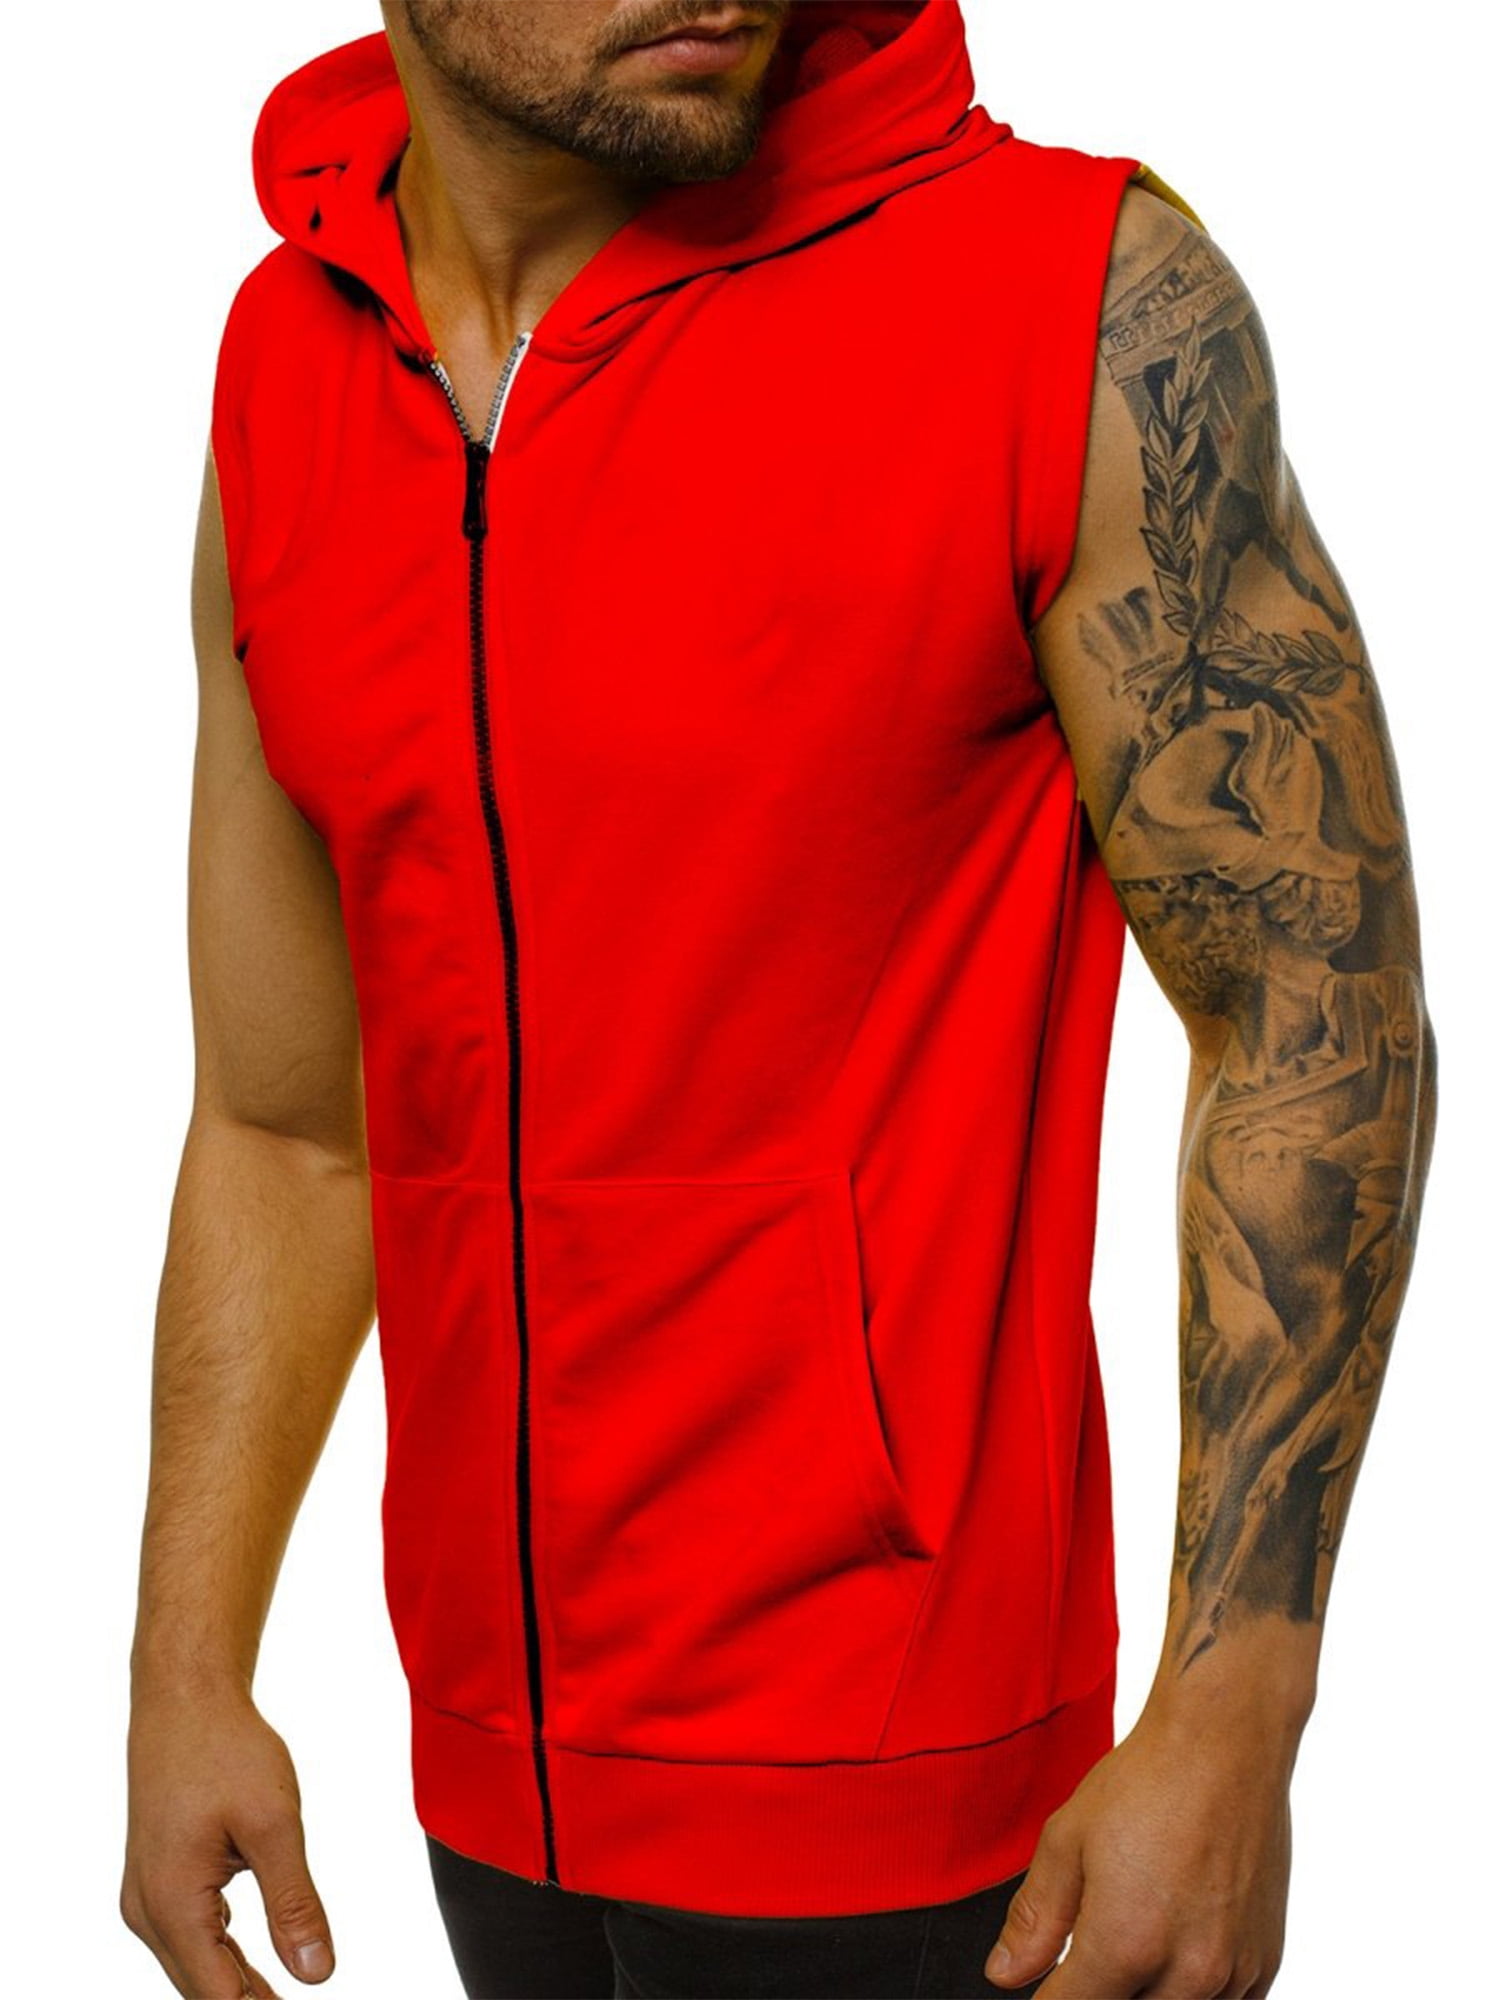 iWoo Mens Gym Tank Tops Hooded Sleeveless Workout Hoodies Muscle Tee with Zipper Pocket